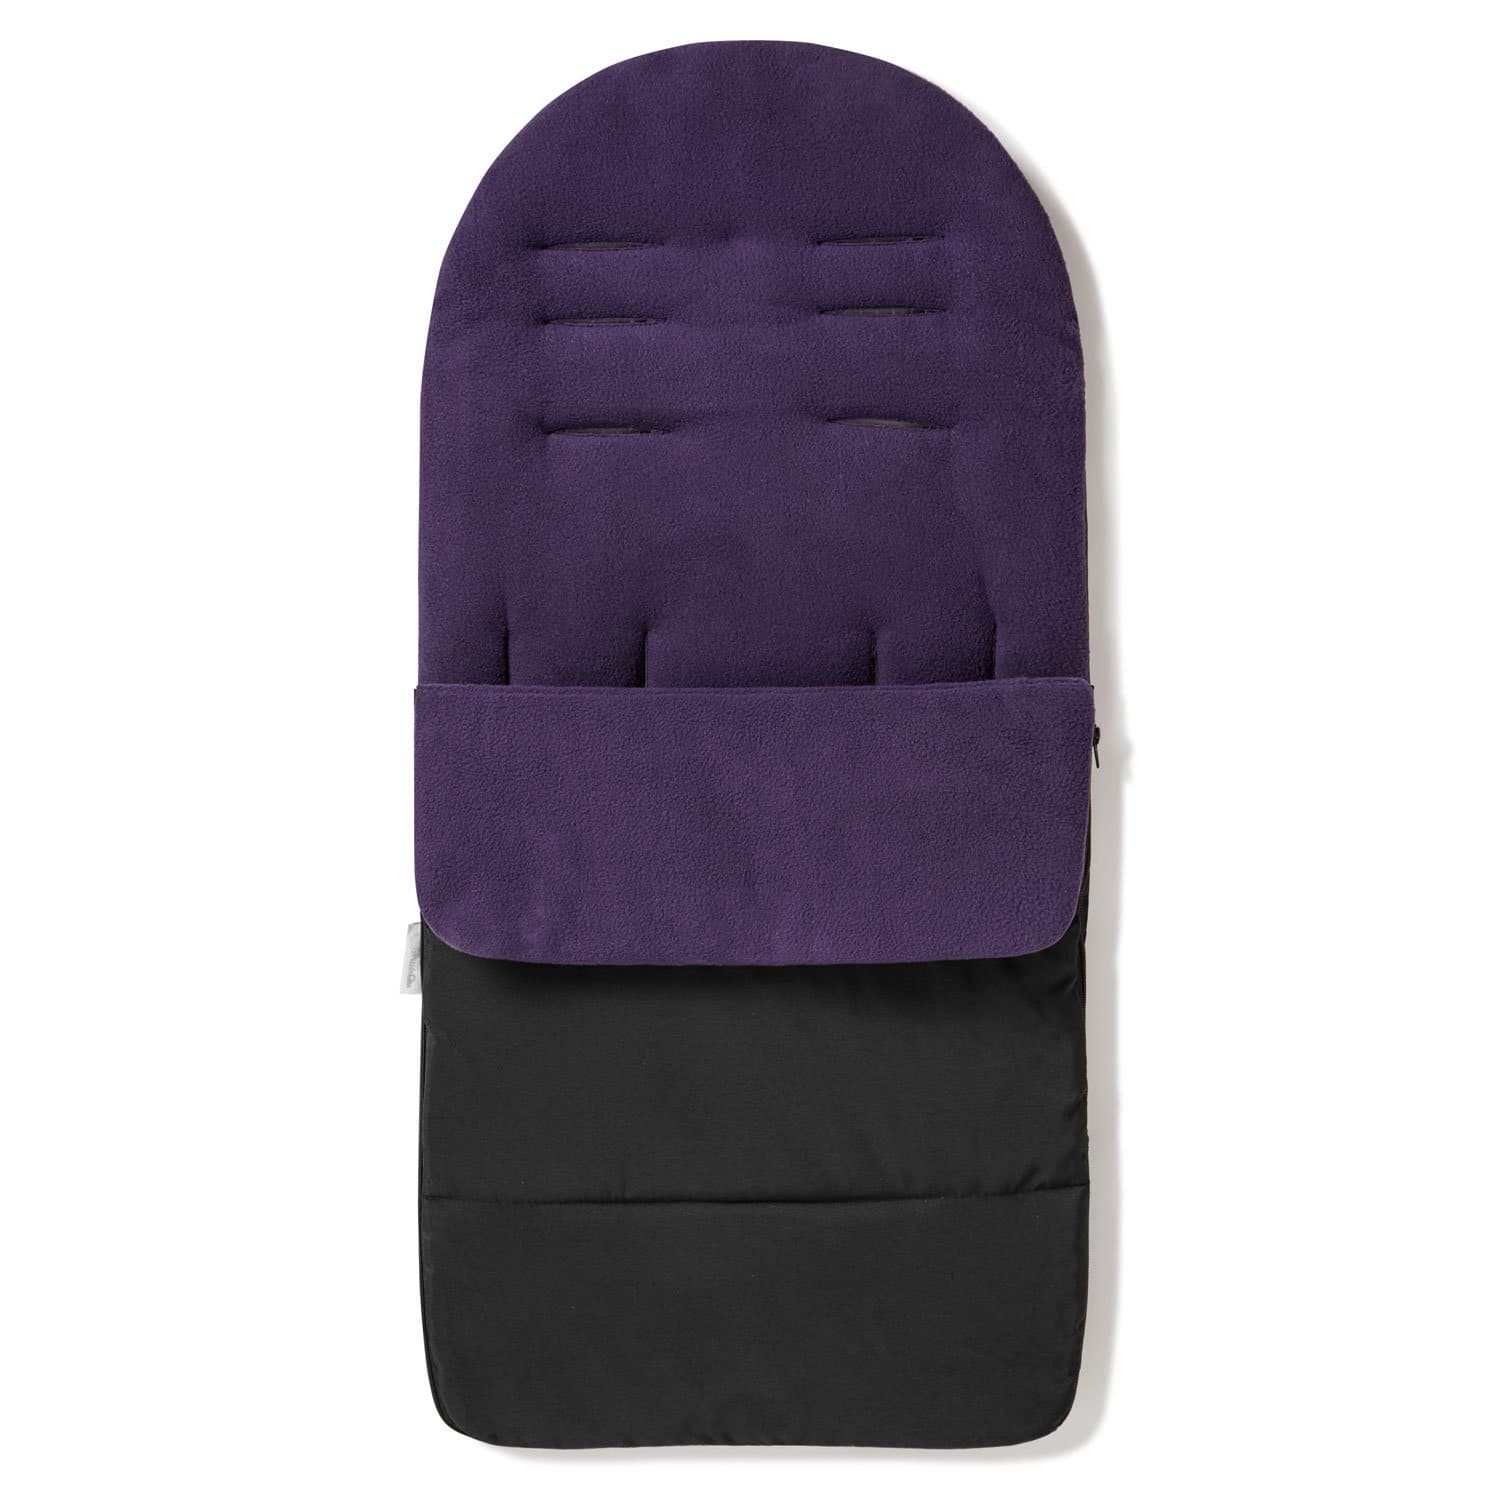 Premium Footmuff / Cosy Toes Compatible with Hesba - Plum Purple / Fits All Models | For Your Little One